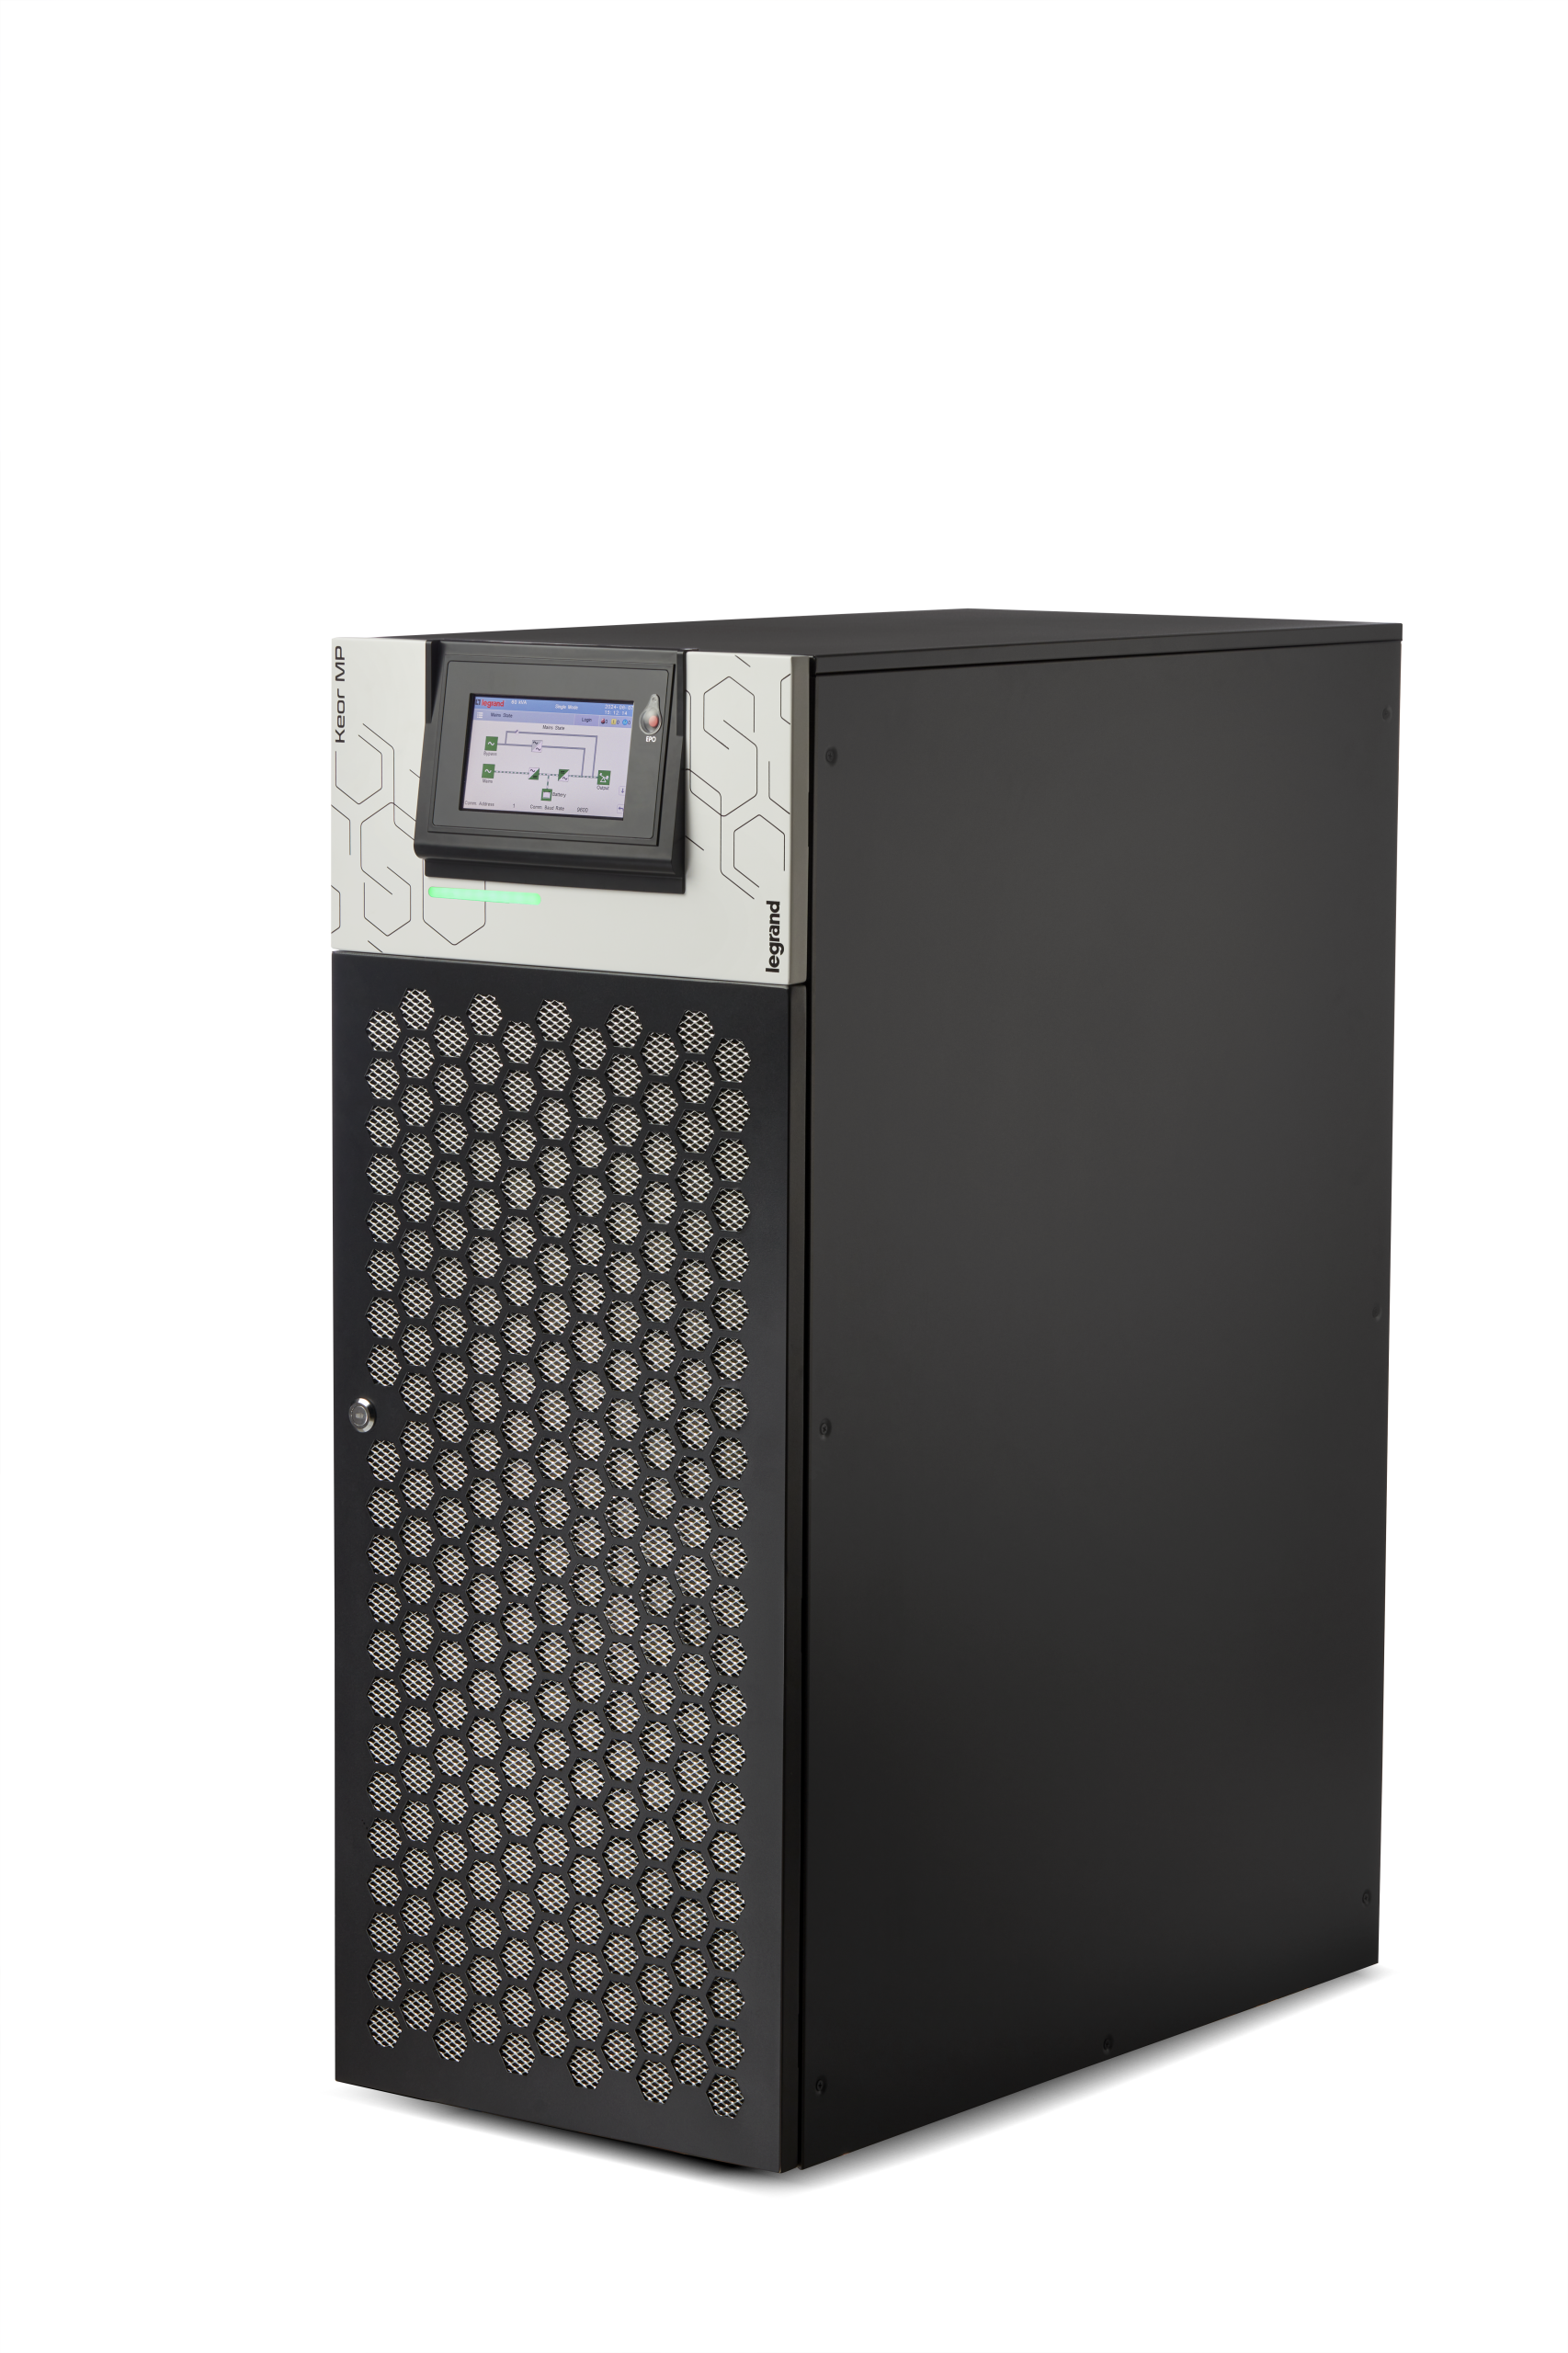 Numeric Launches its NextGen 3 Phase UPS Keor MP - Innovation that drives the future